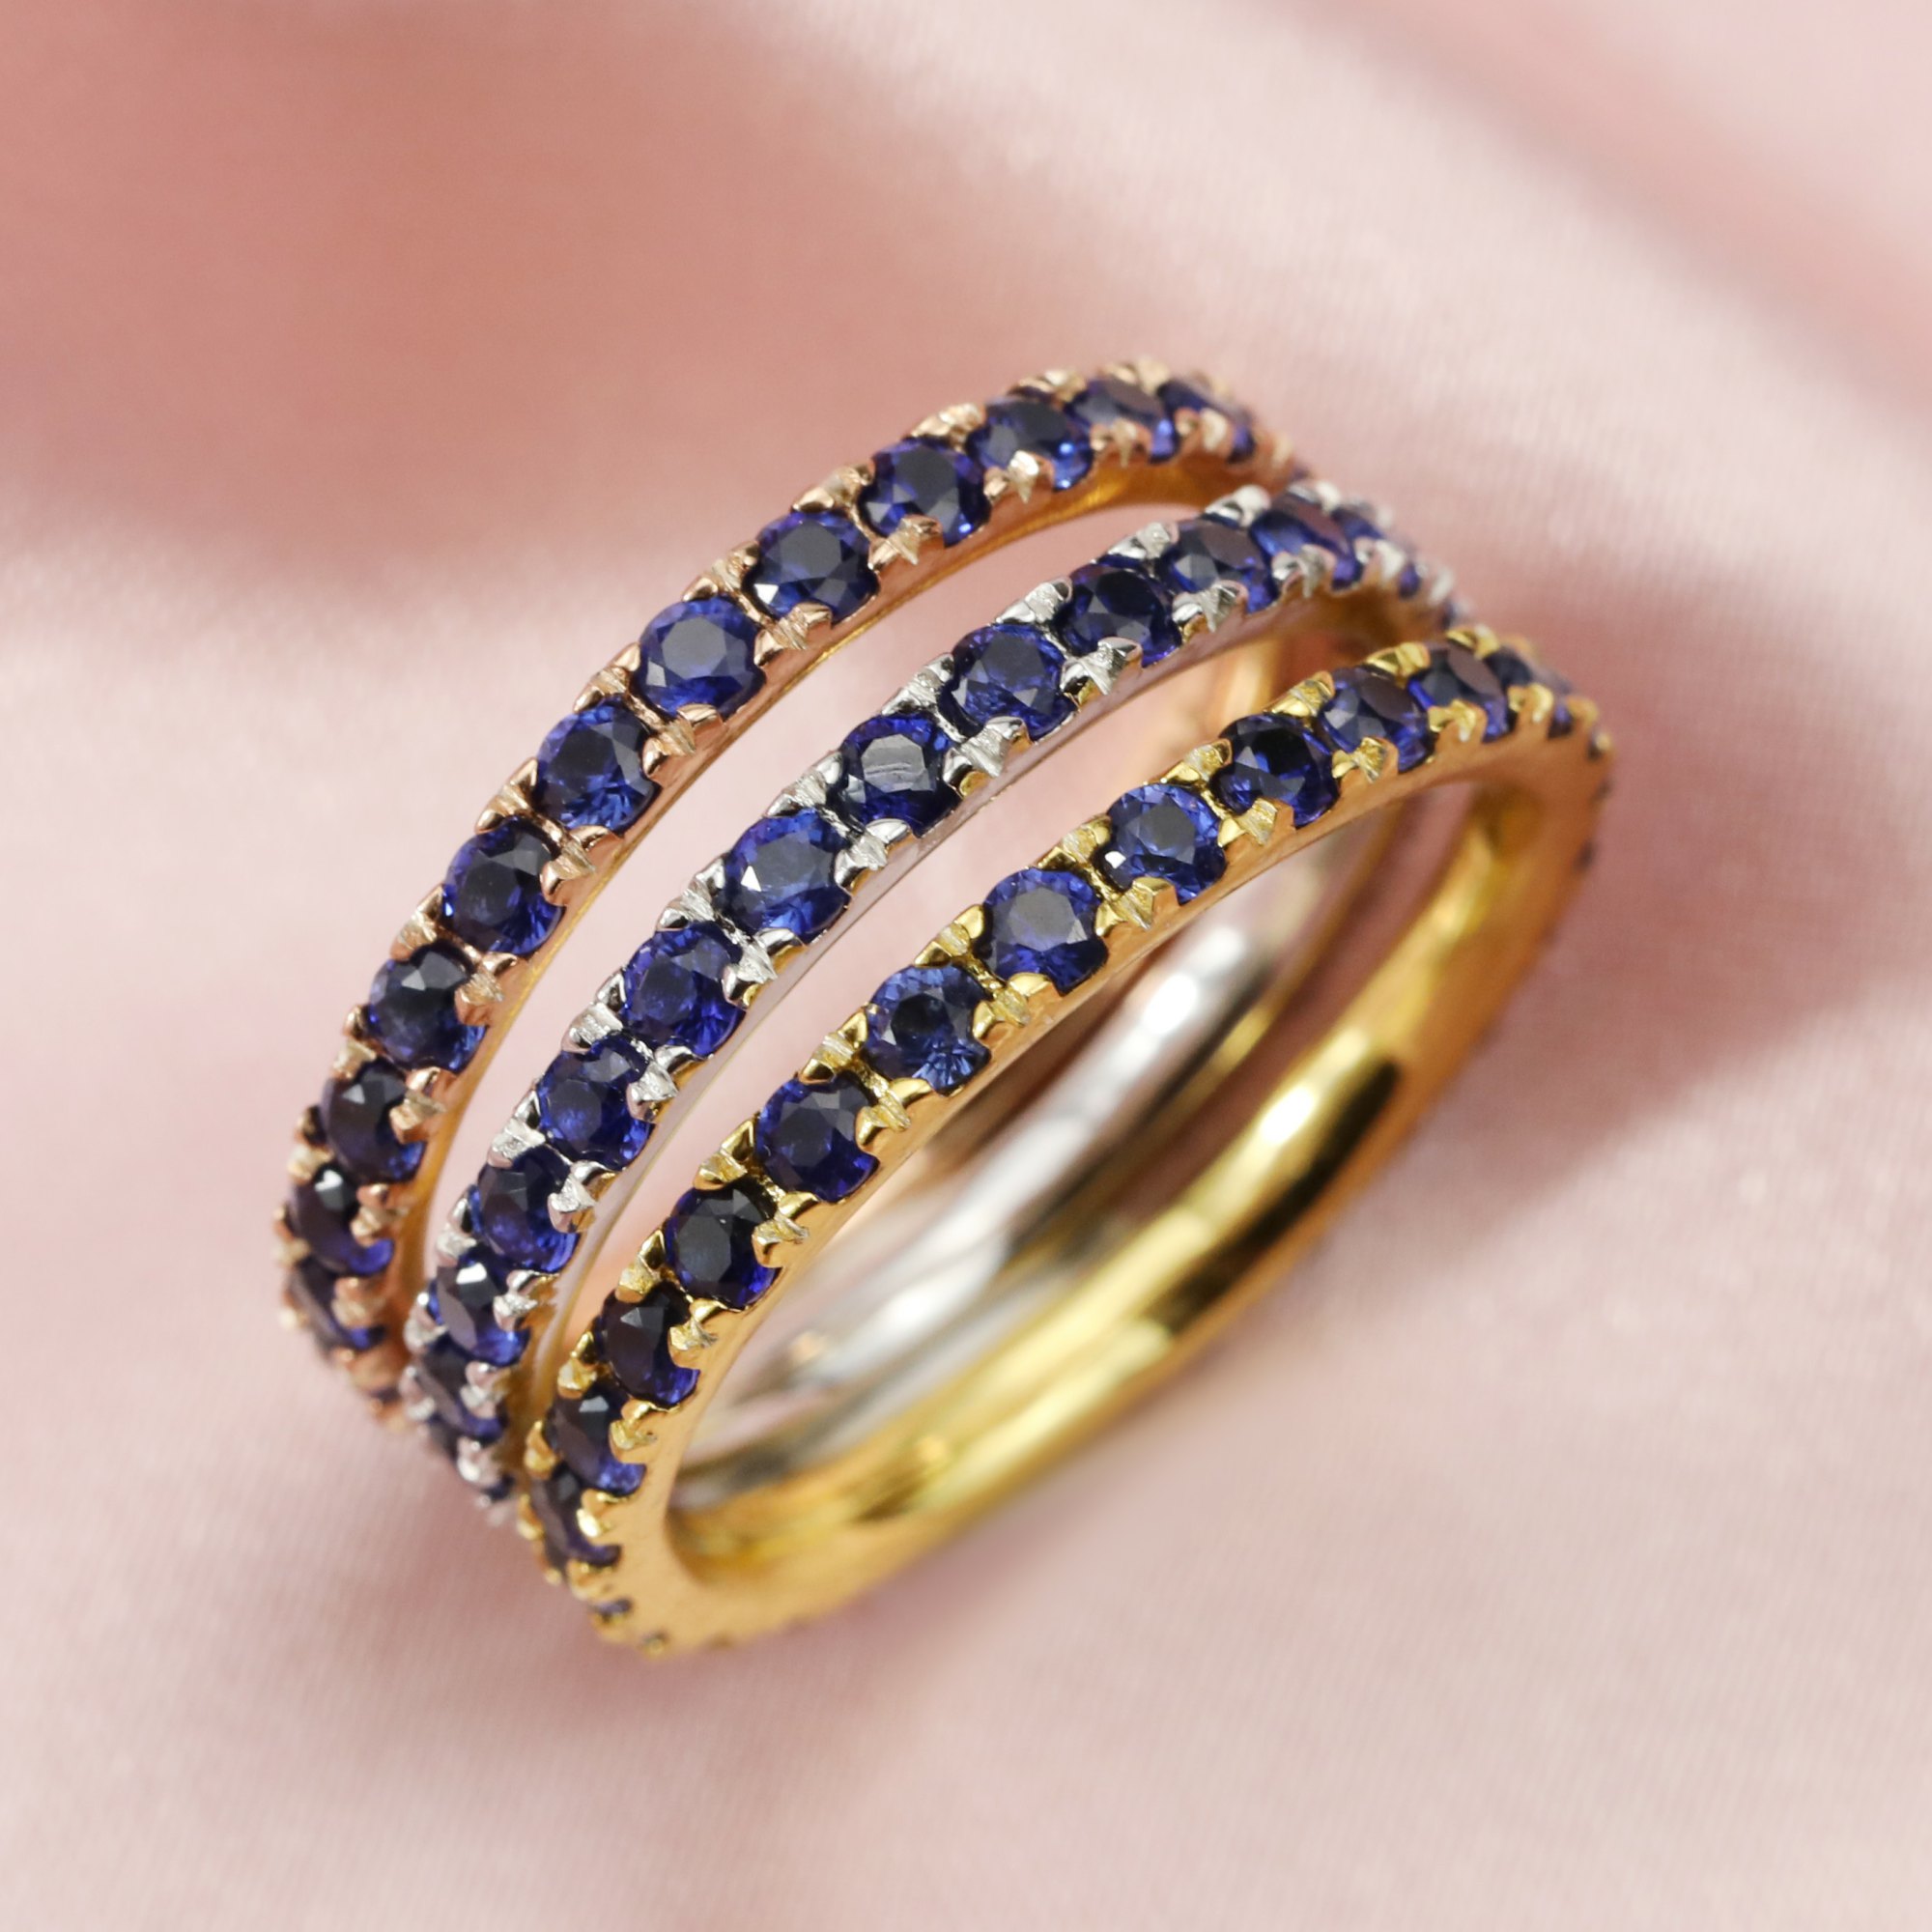 2MM Dainty September Birthstone Eternity Ring Blue Sapphire Gemstone Wedding Engagement Full Band Stackable Ring Solid 14K Gold Ring 1294300 - Click Image to Close